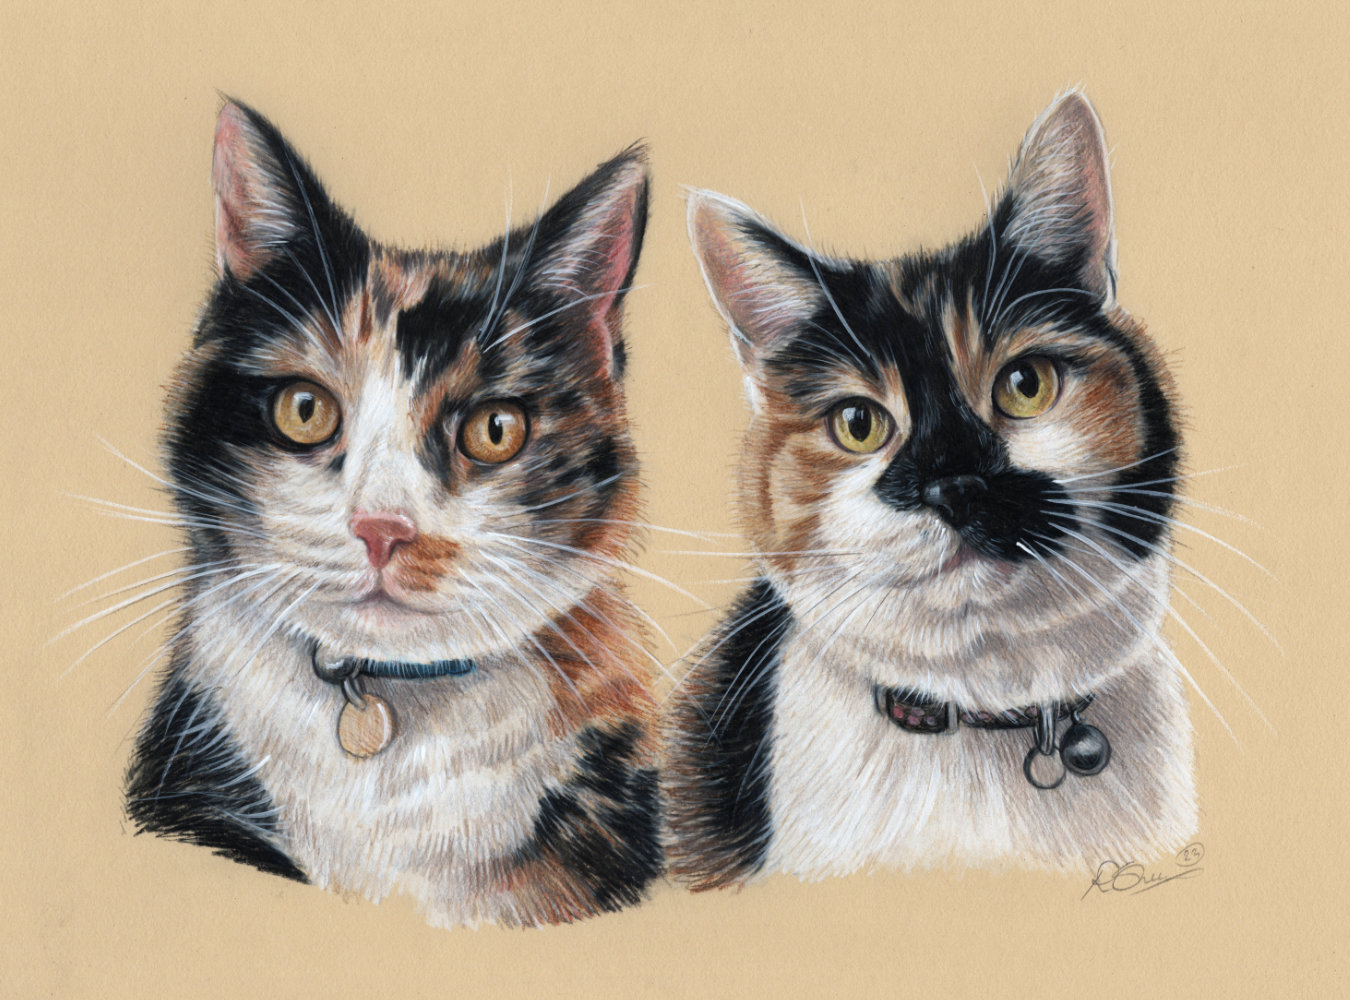 Pencil drawing of two cats